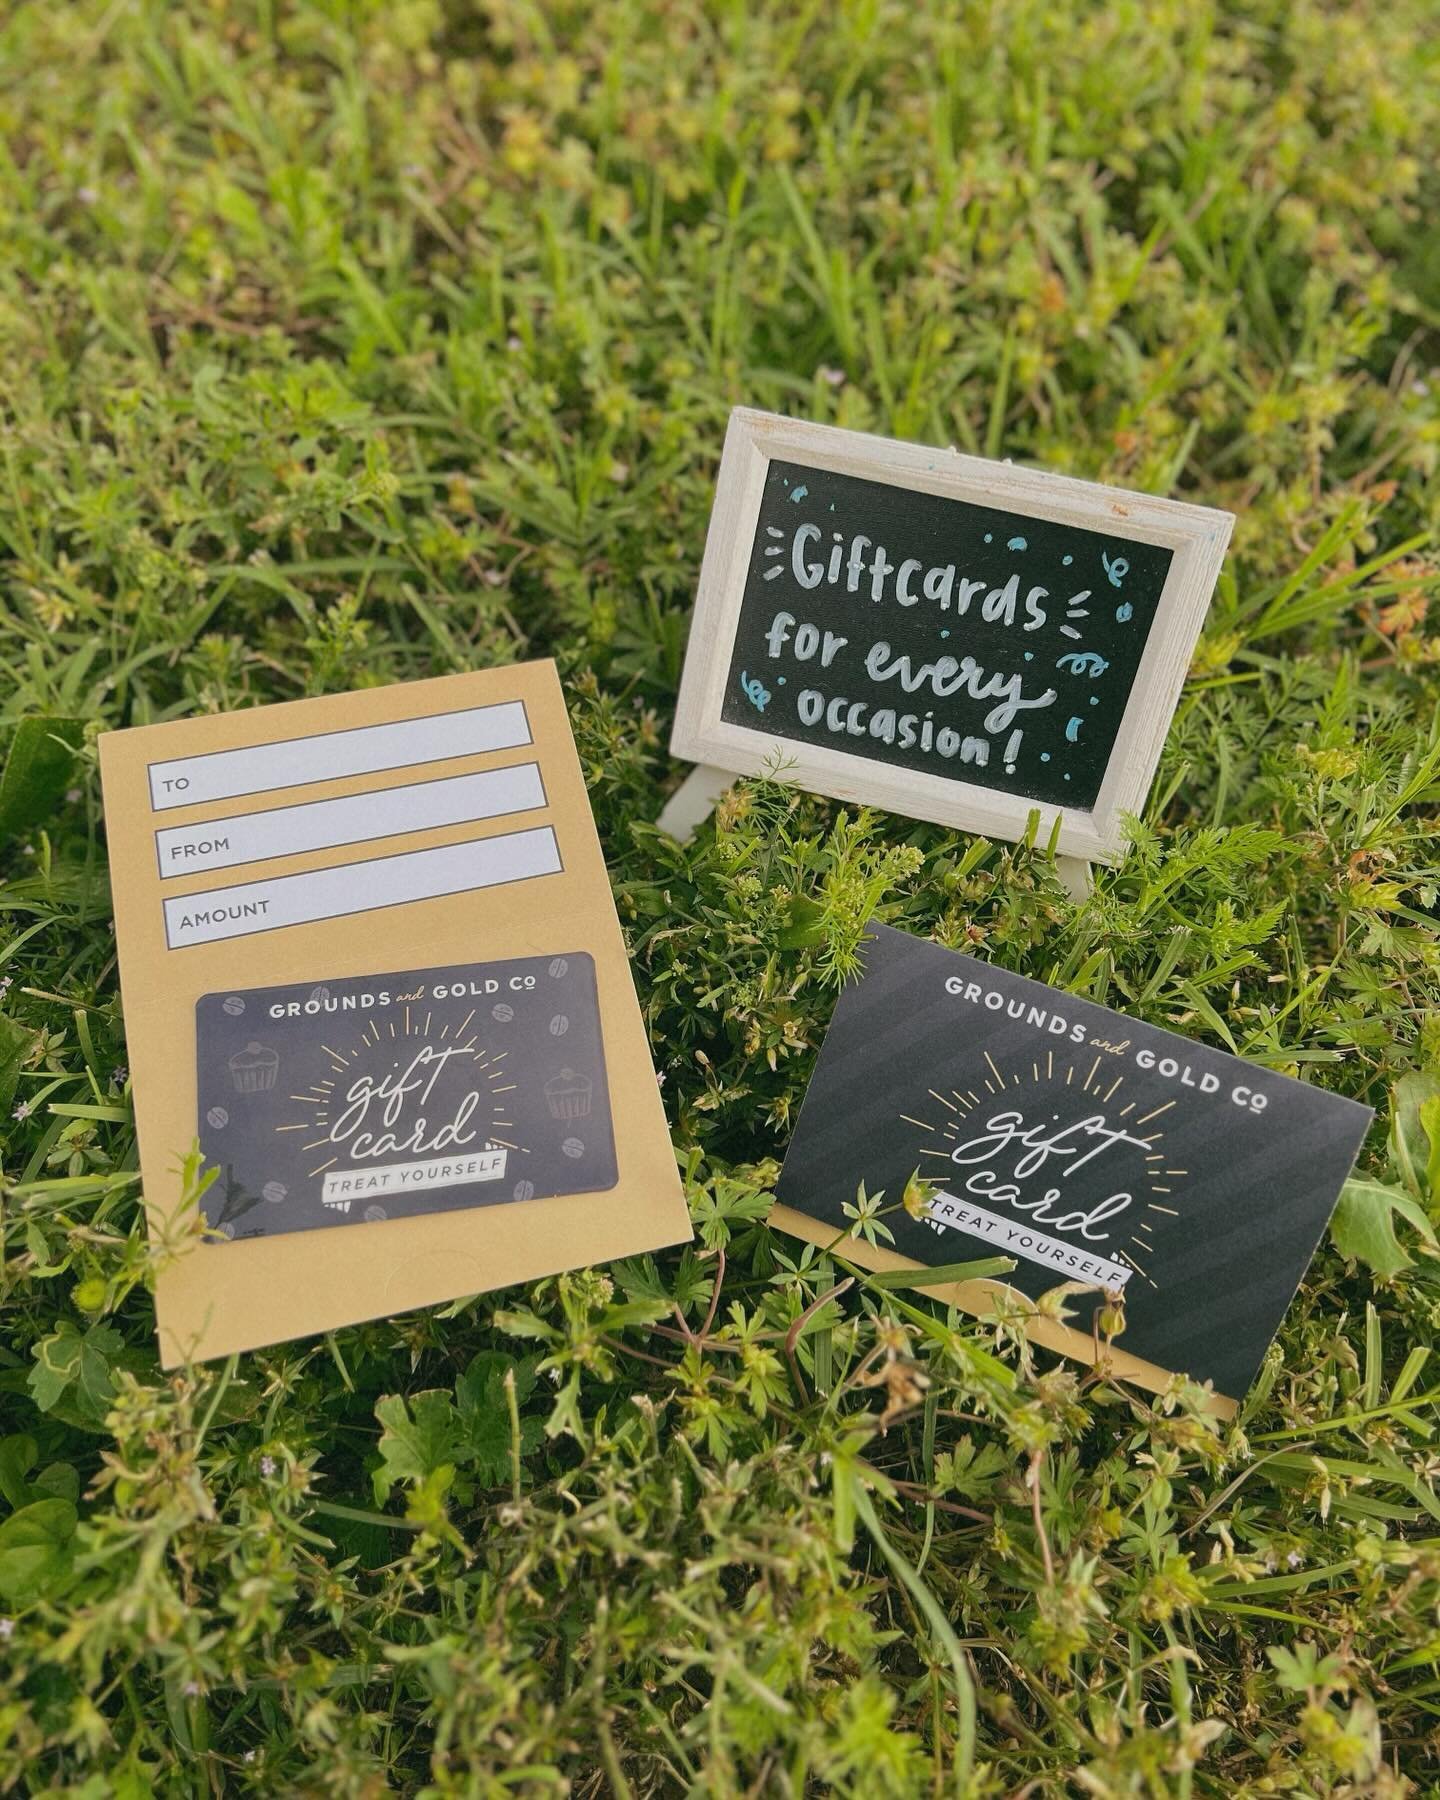 Graduation, Mother&rsquo;s Day, Teacher Appreciation, Birthdays! So many special occasions are on the way which makes it the perfect time to treat someone to a G&amp;G gift card! Stop in and grab one today for that special someone 🥳🎉

#gift #treats